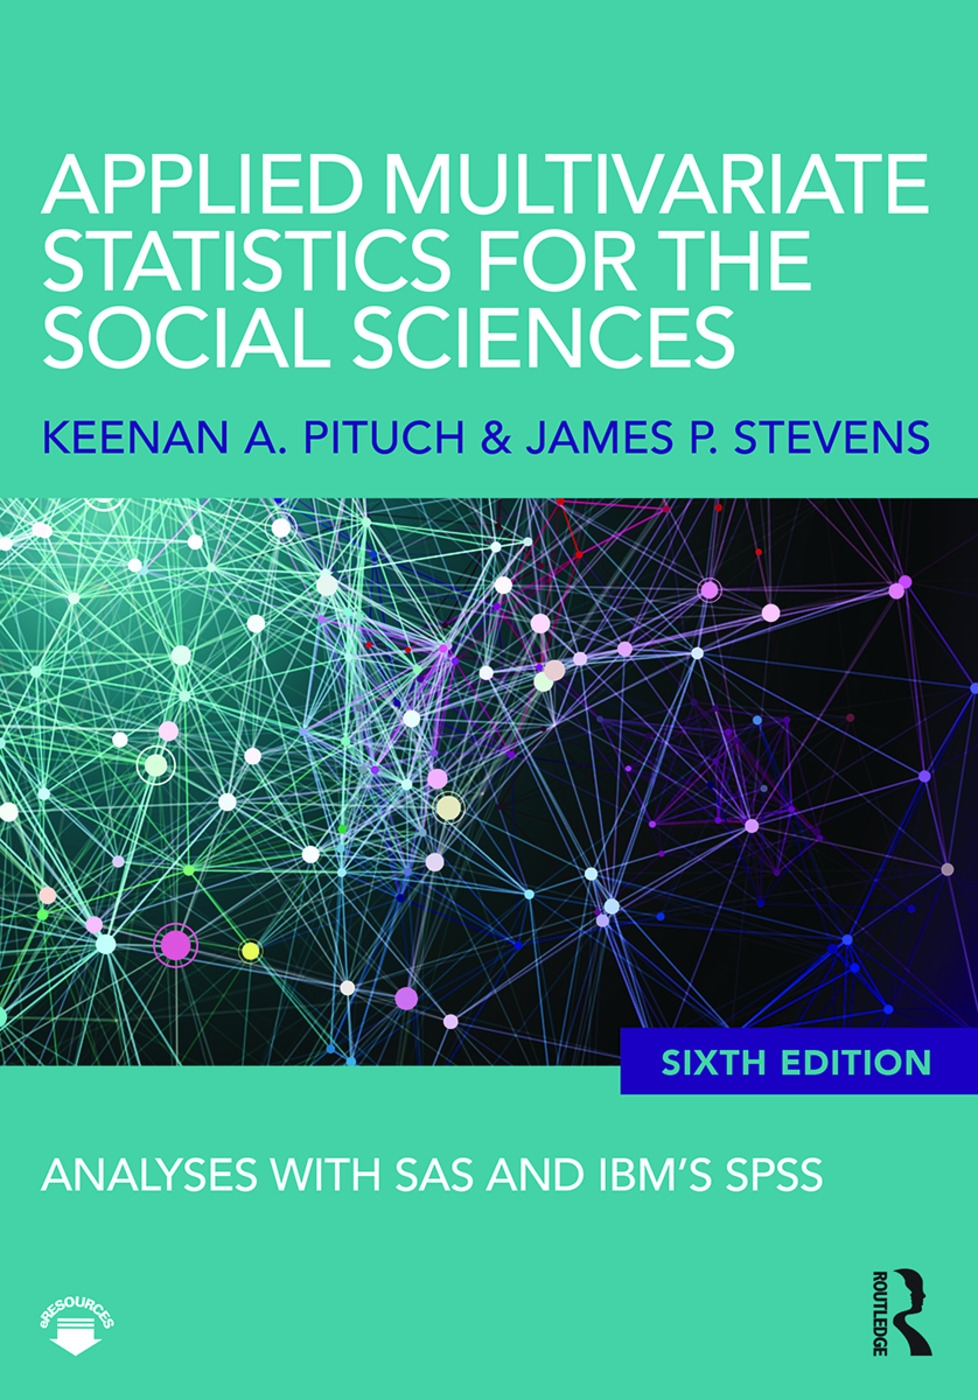 Applied Multivariate Statistics for the Social Sciences: Analyses with SAS and Ibm’s Spss, Sixth Edition